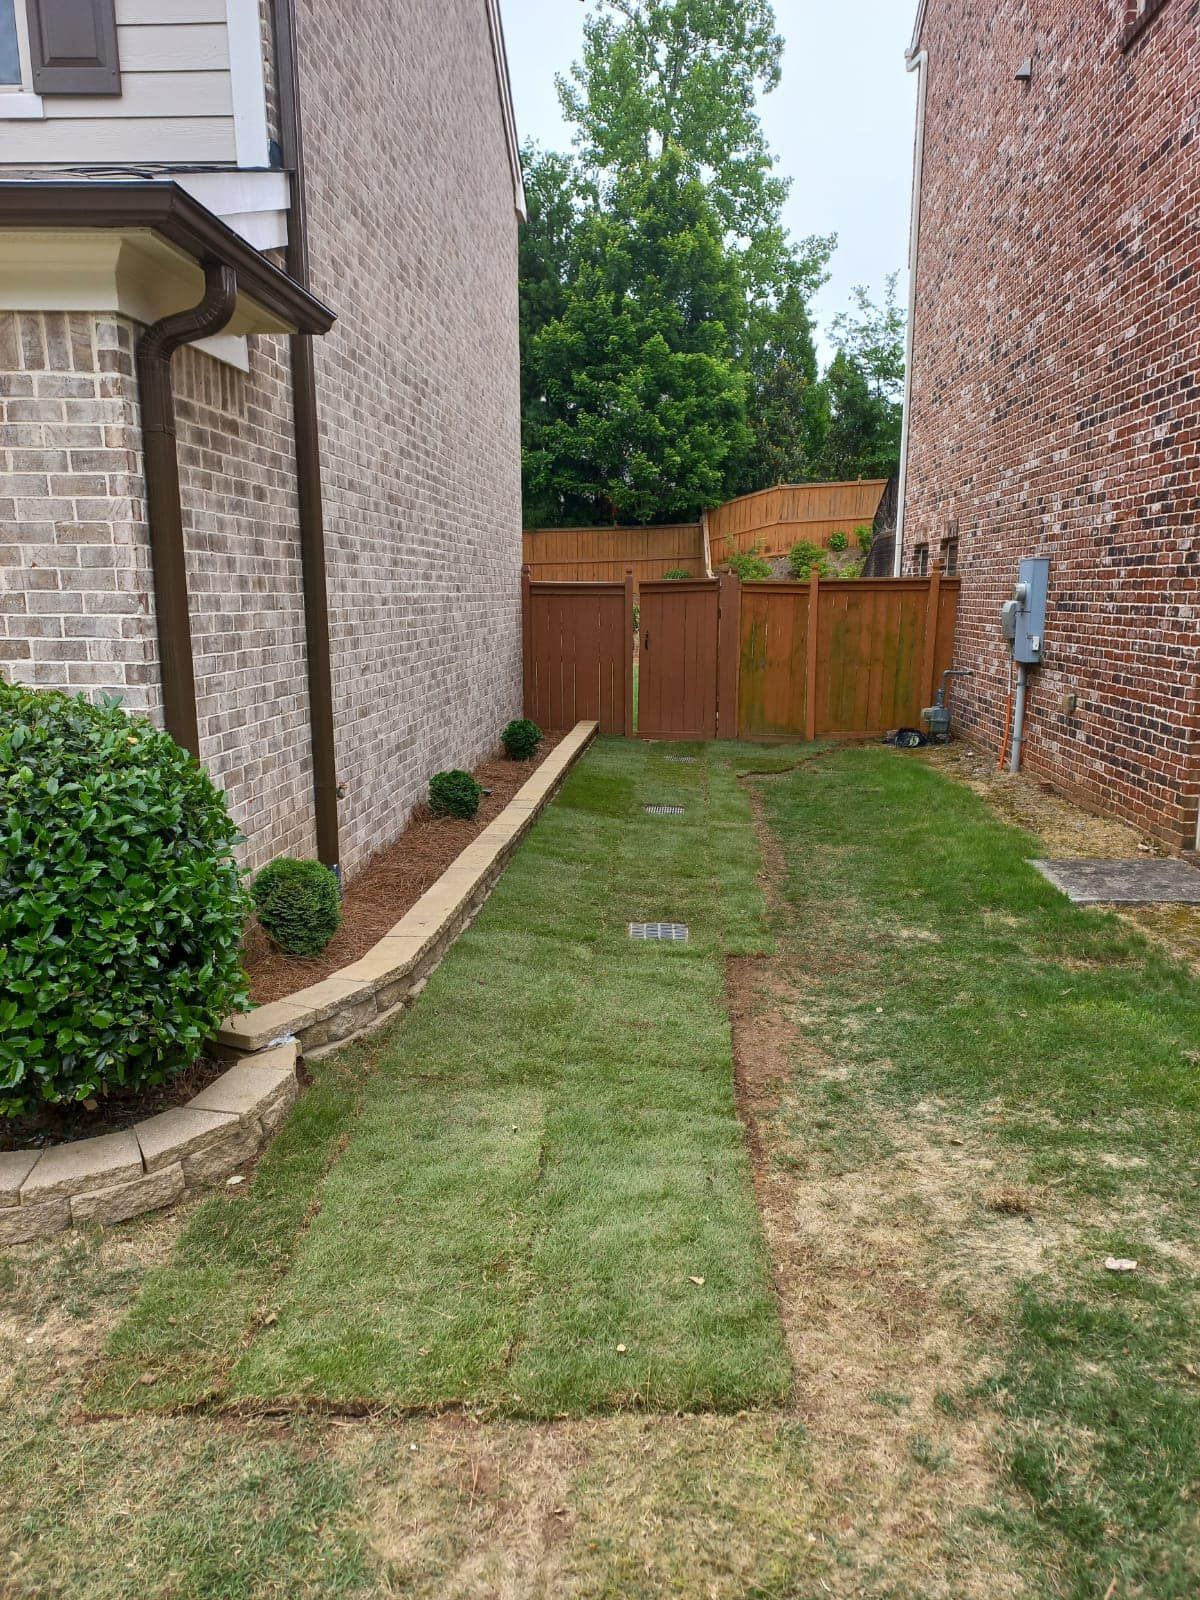 All Photos for Two Brothers Landscaping in Atlanta, Georgia